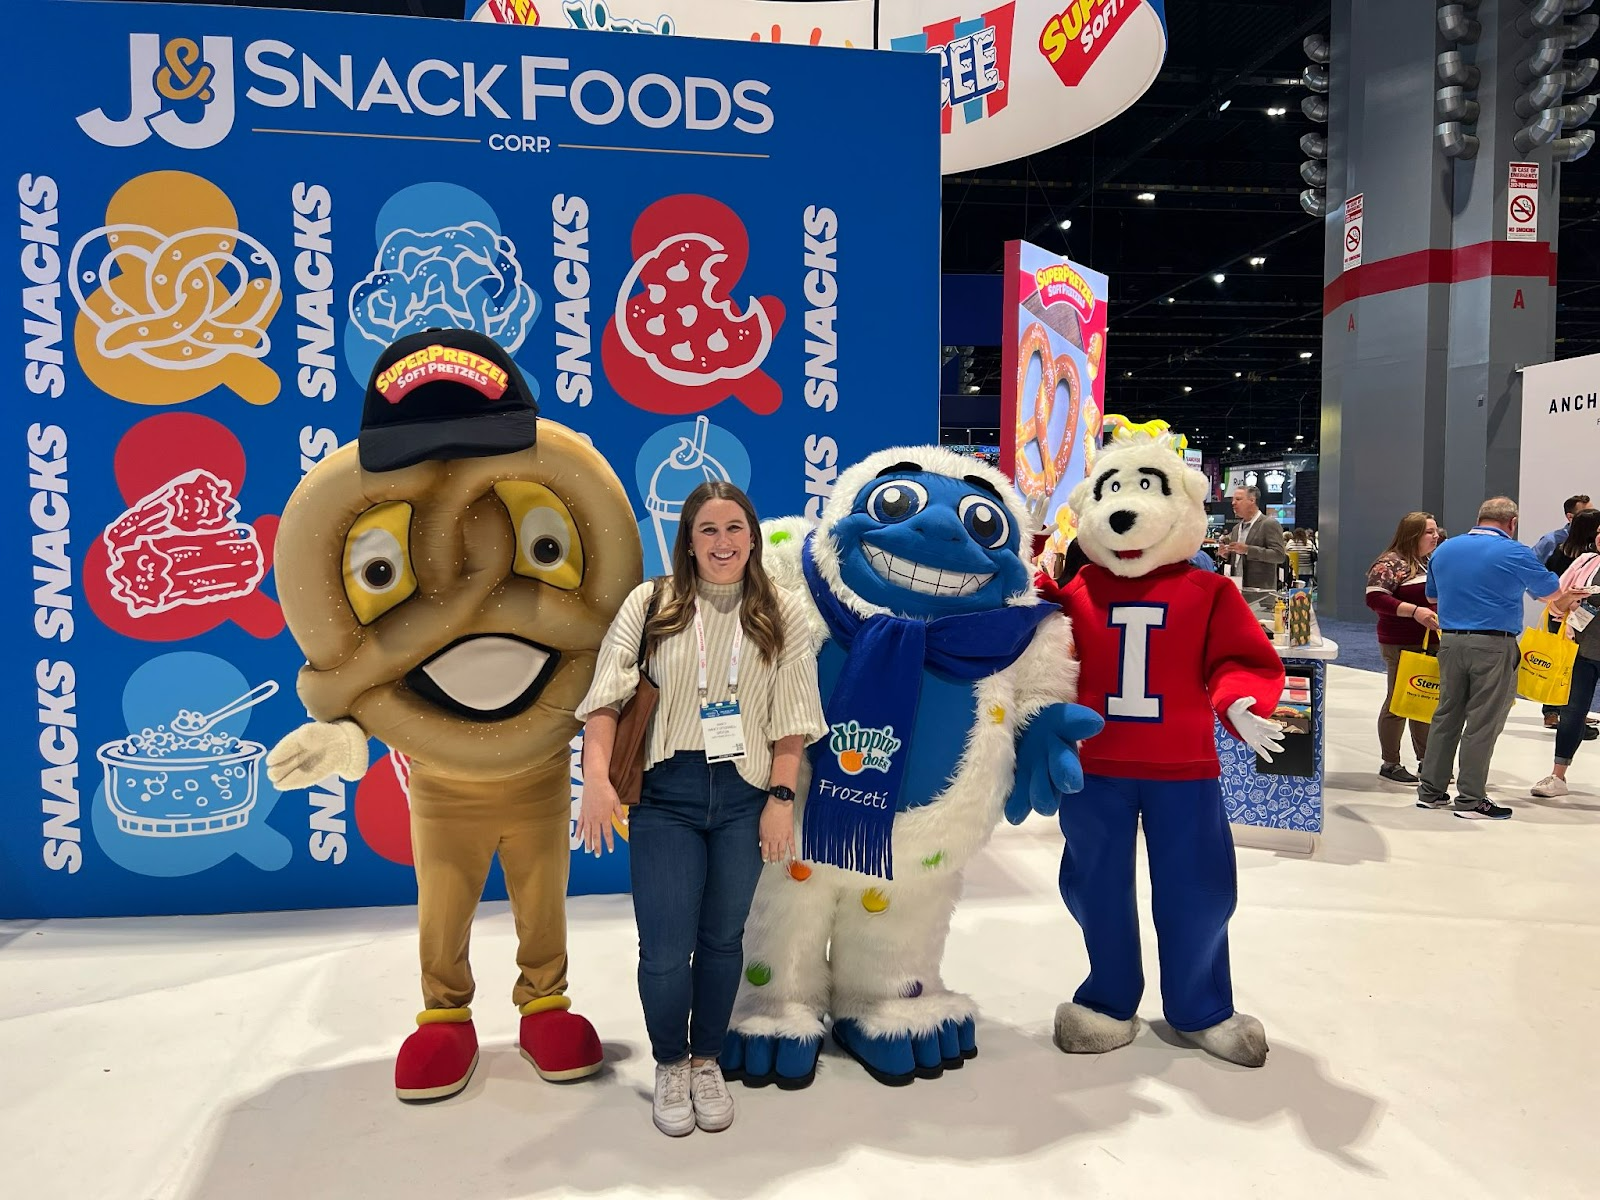 Nancy O'Connell at the 2023 National Restaurant Association Show, posing with a pretzel, Yeti, and bear mascot